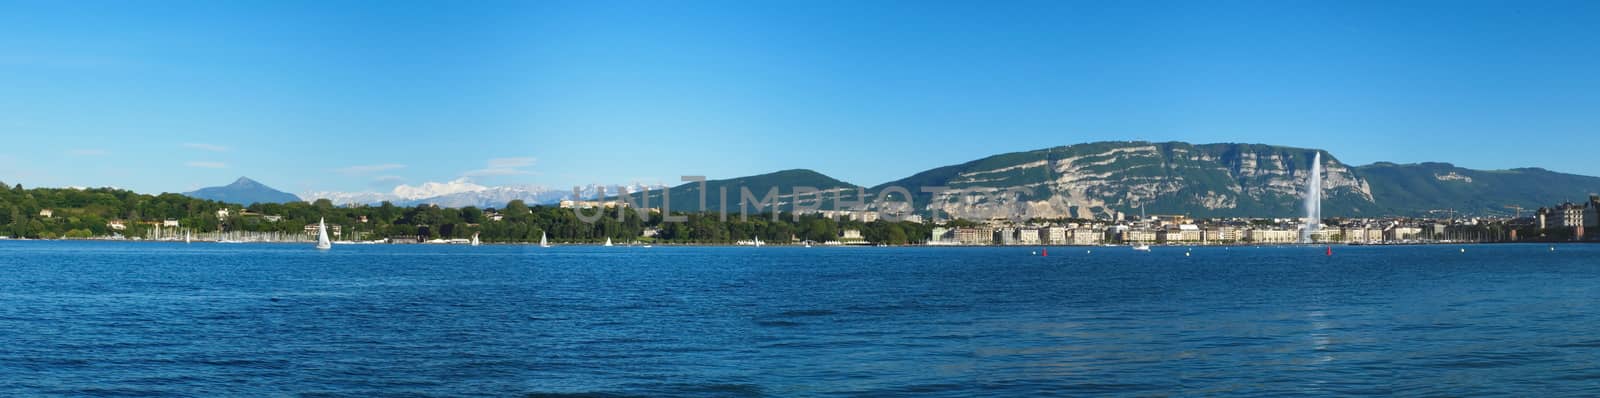 Panoramic view of Geneva area with the fountain, lake, Saleva and Alps mountains (Mont-Blanc) by beautiful day, Switzerland